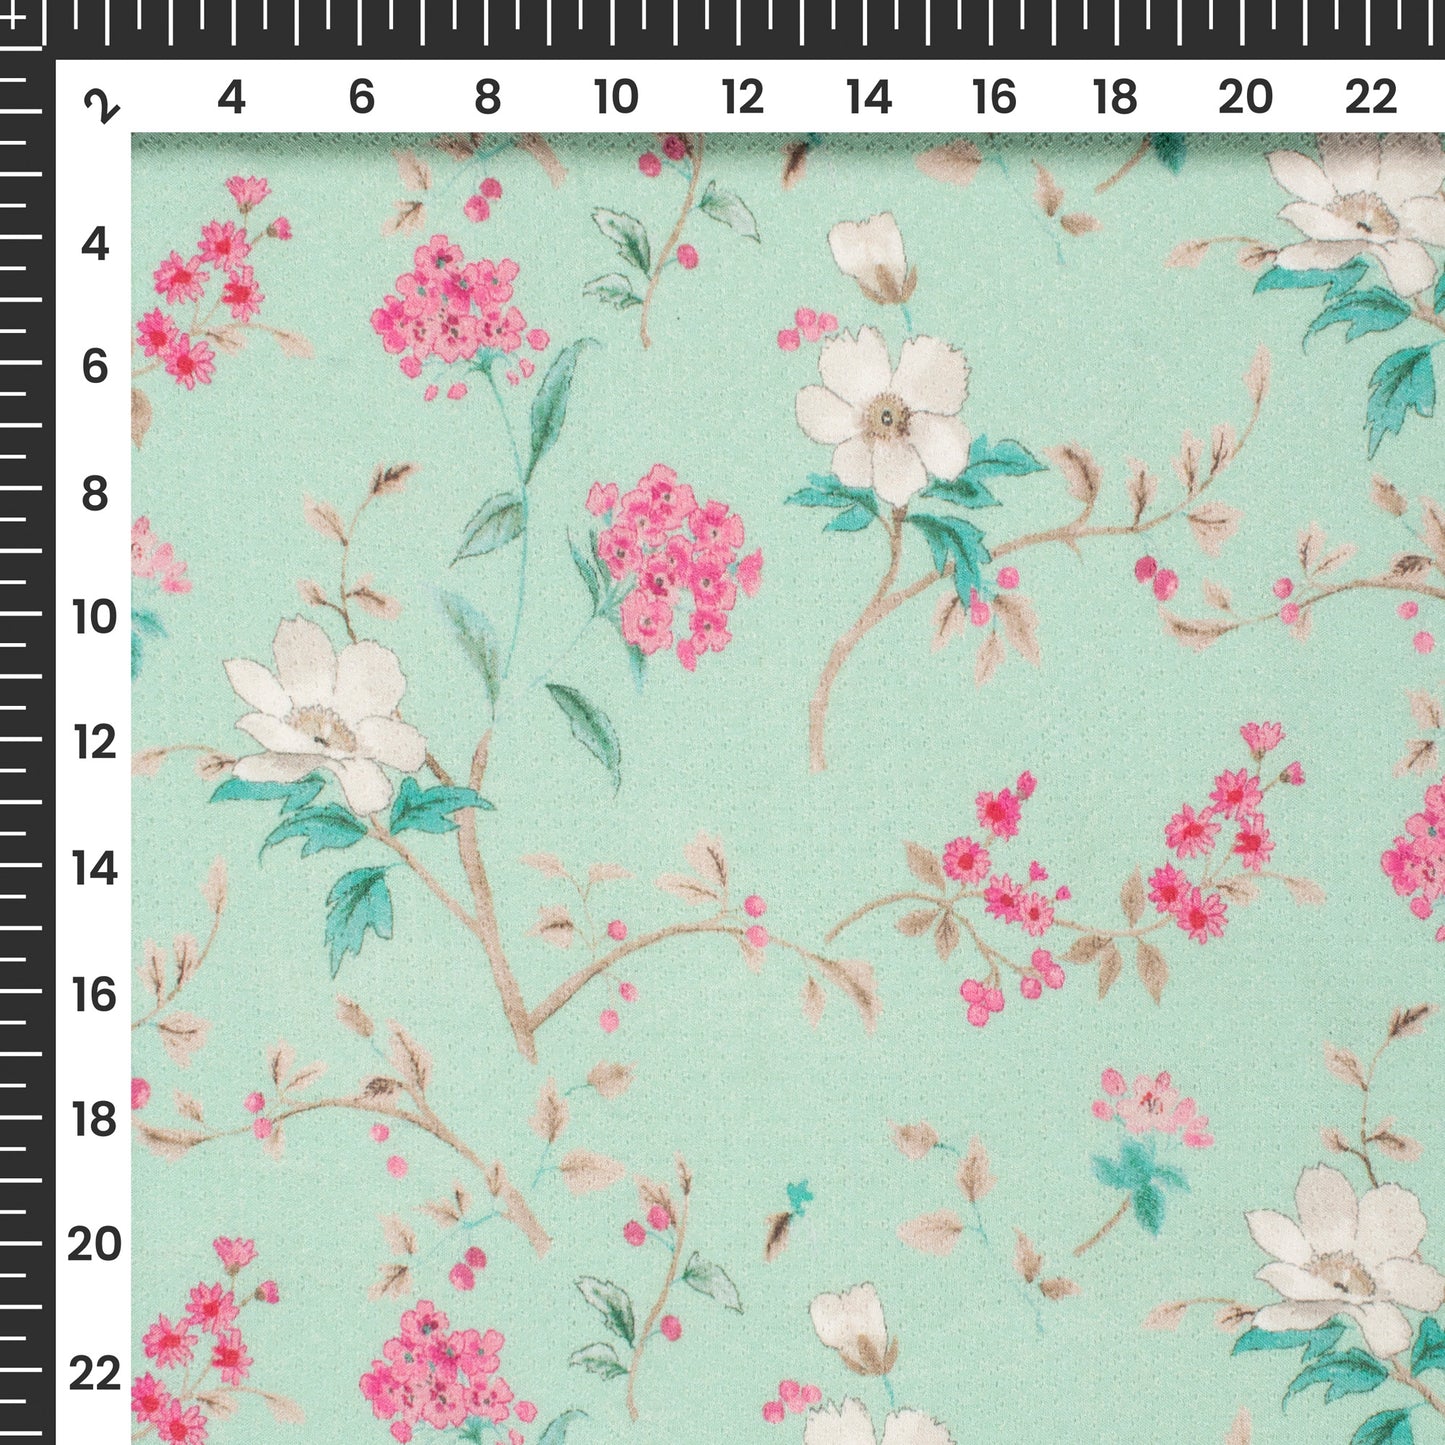 Mint Green Floral Printed Sustainable Eucalyptus Fabric